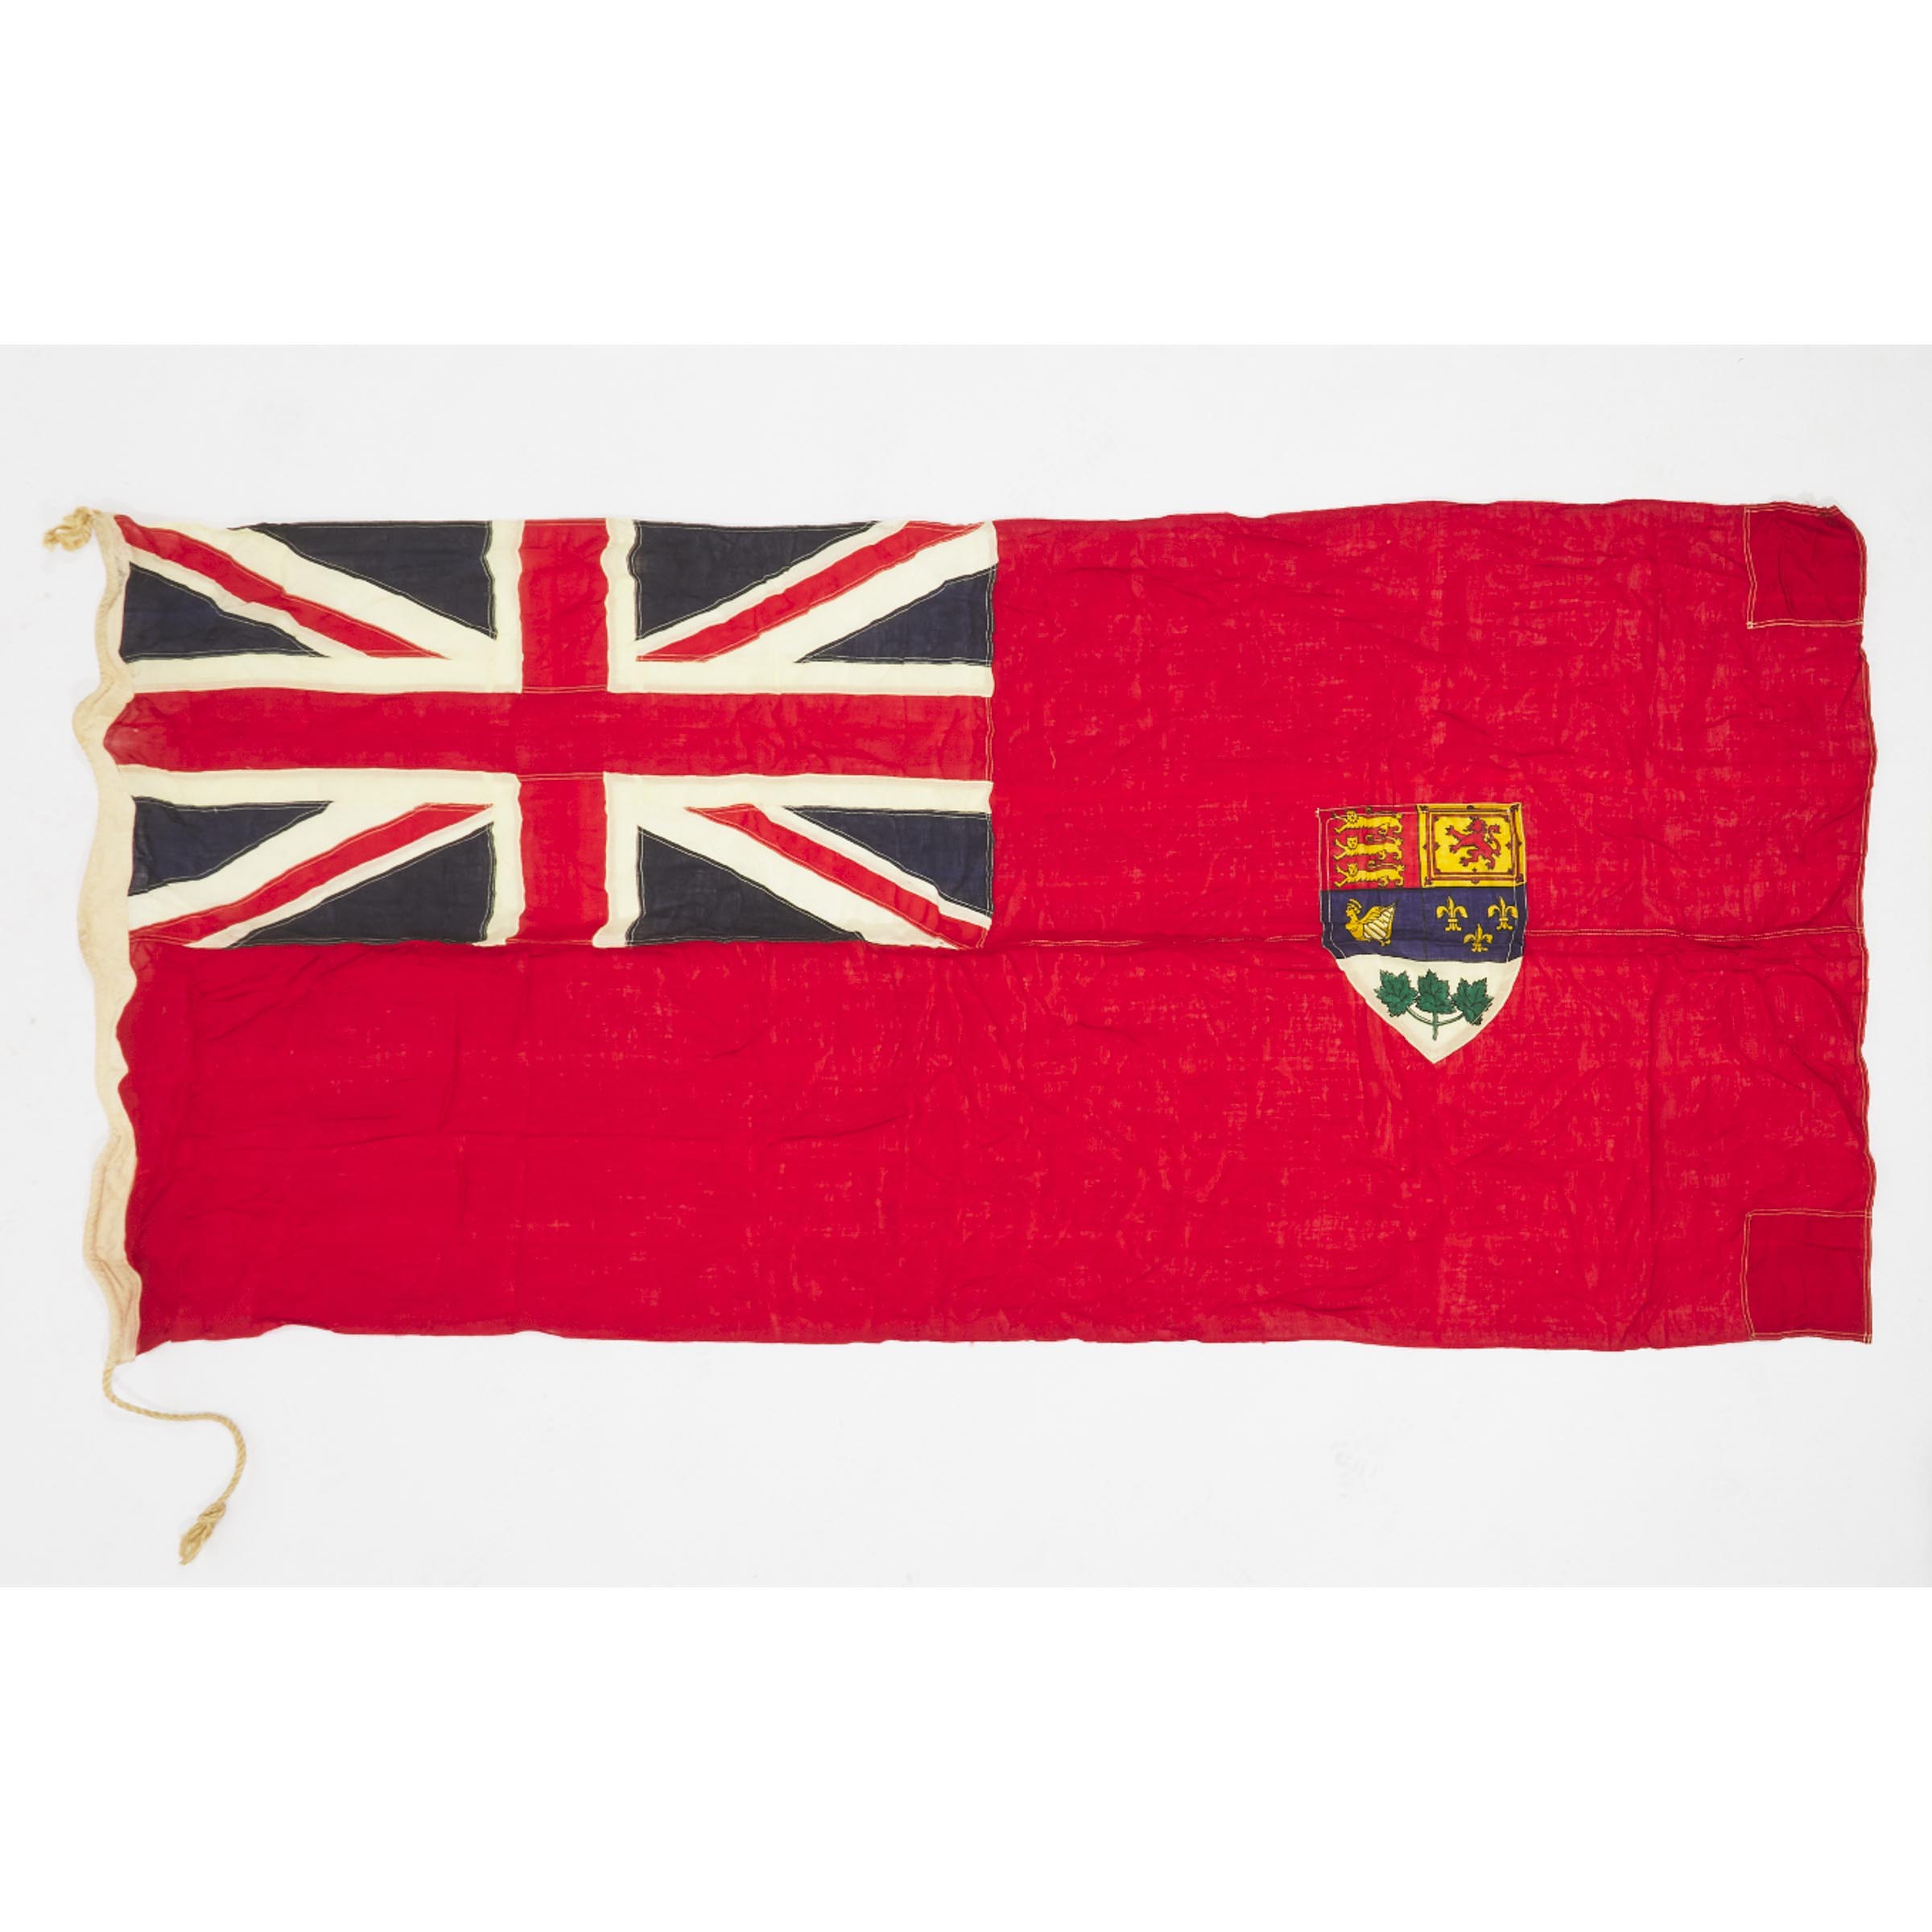 Large Canadian Red Ensign, mid 20th century